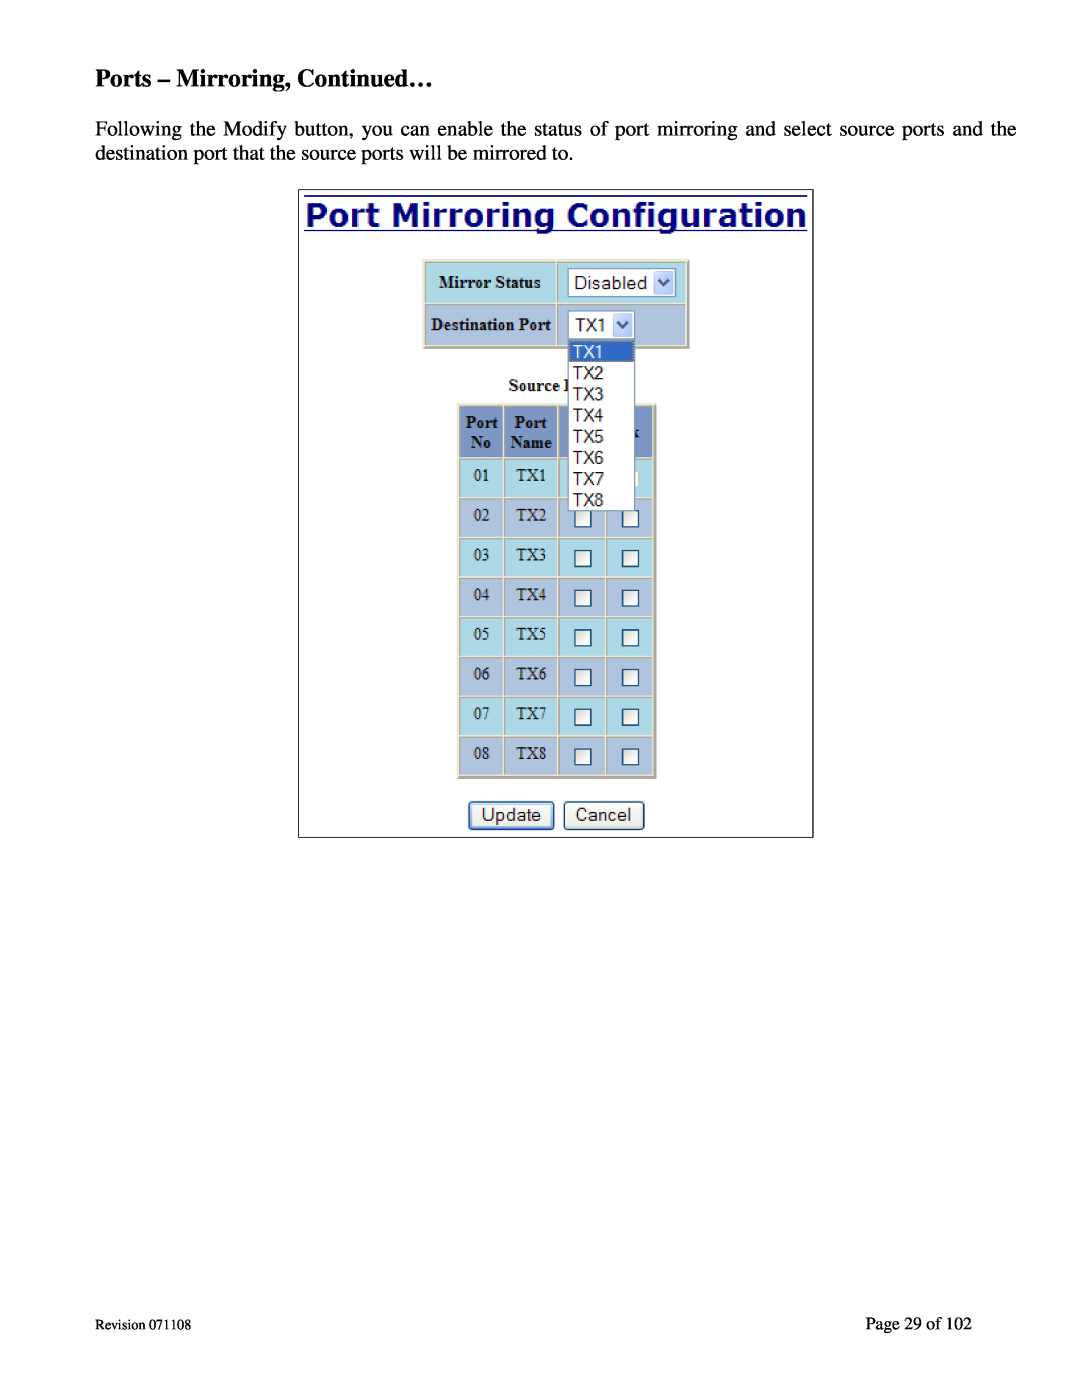 N-Tron 708M12 user manual Ports - Mirroring, Continued…, Page 29 of, Revision 